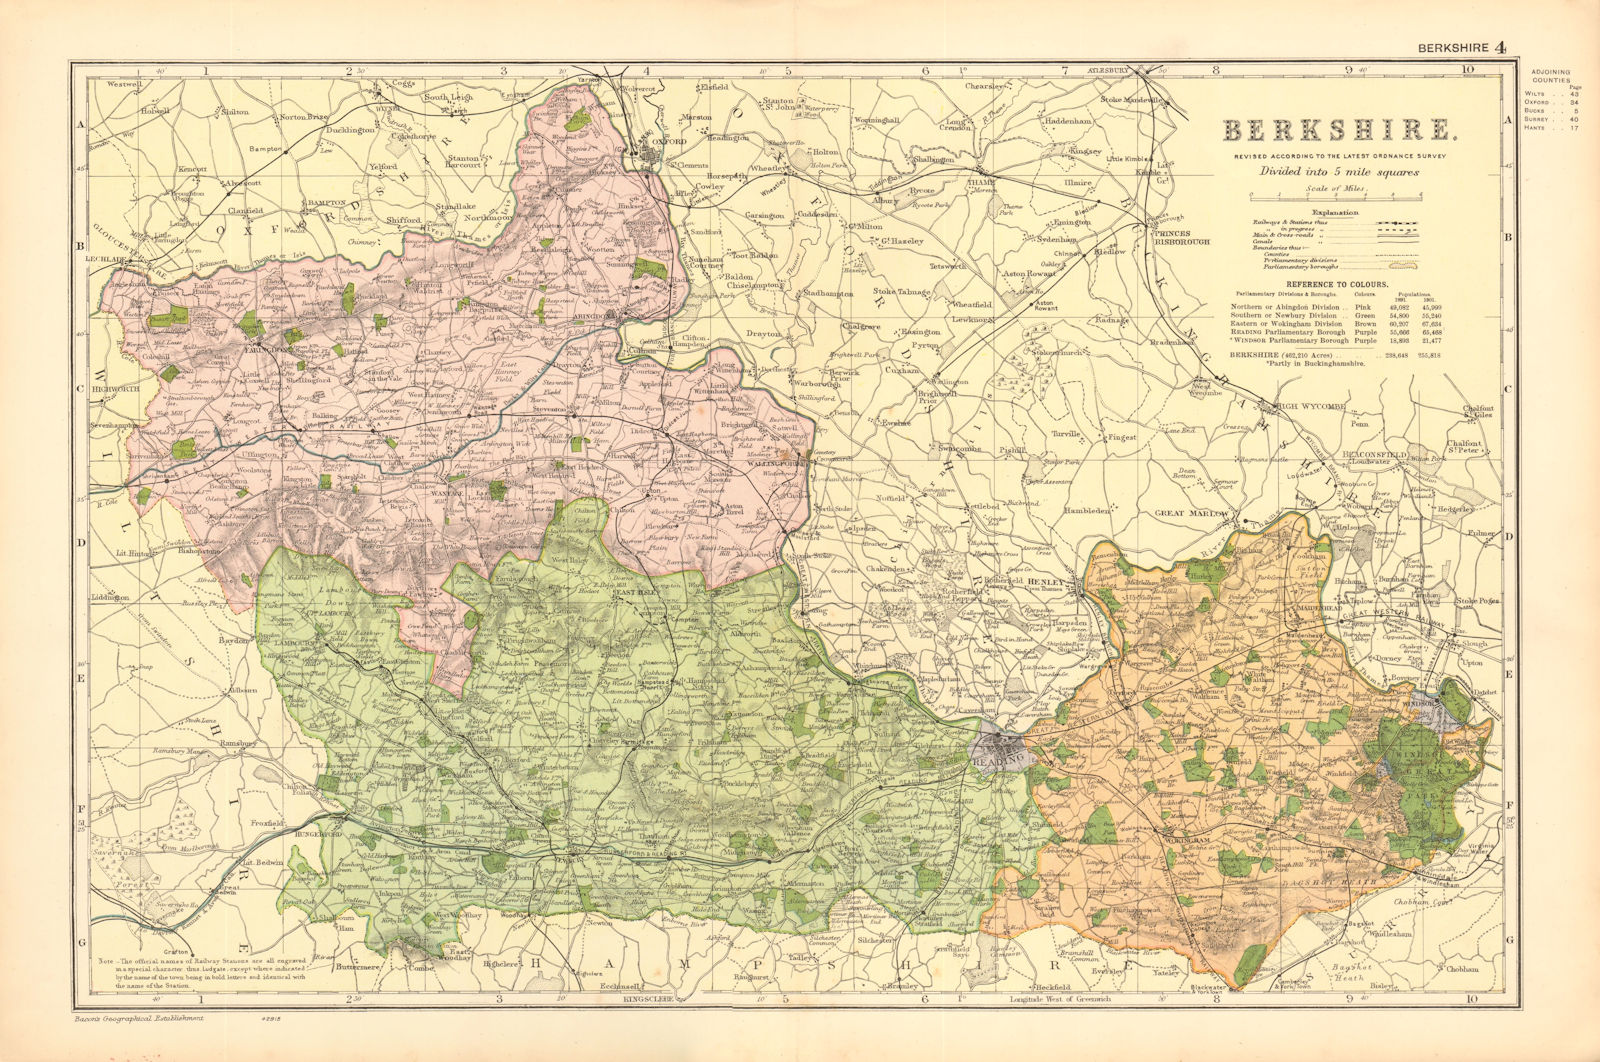 BERKSHIRE. Showing Parliamentary divisions, boroughs & parks. BACON 1904 map